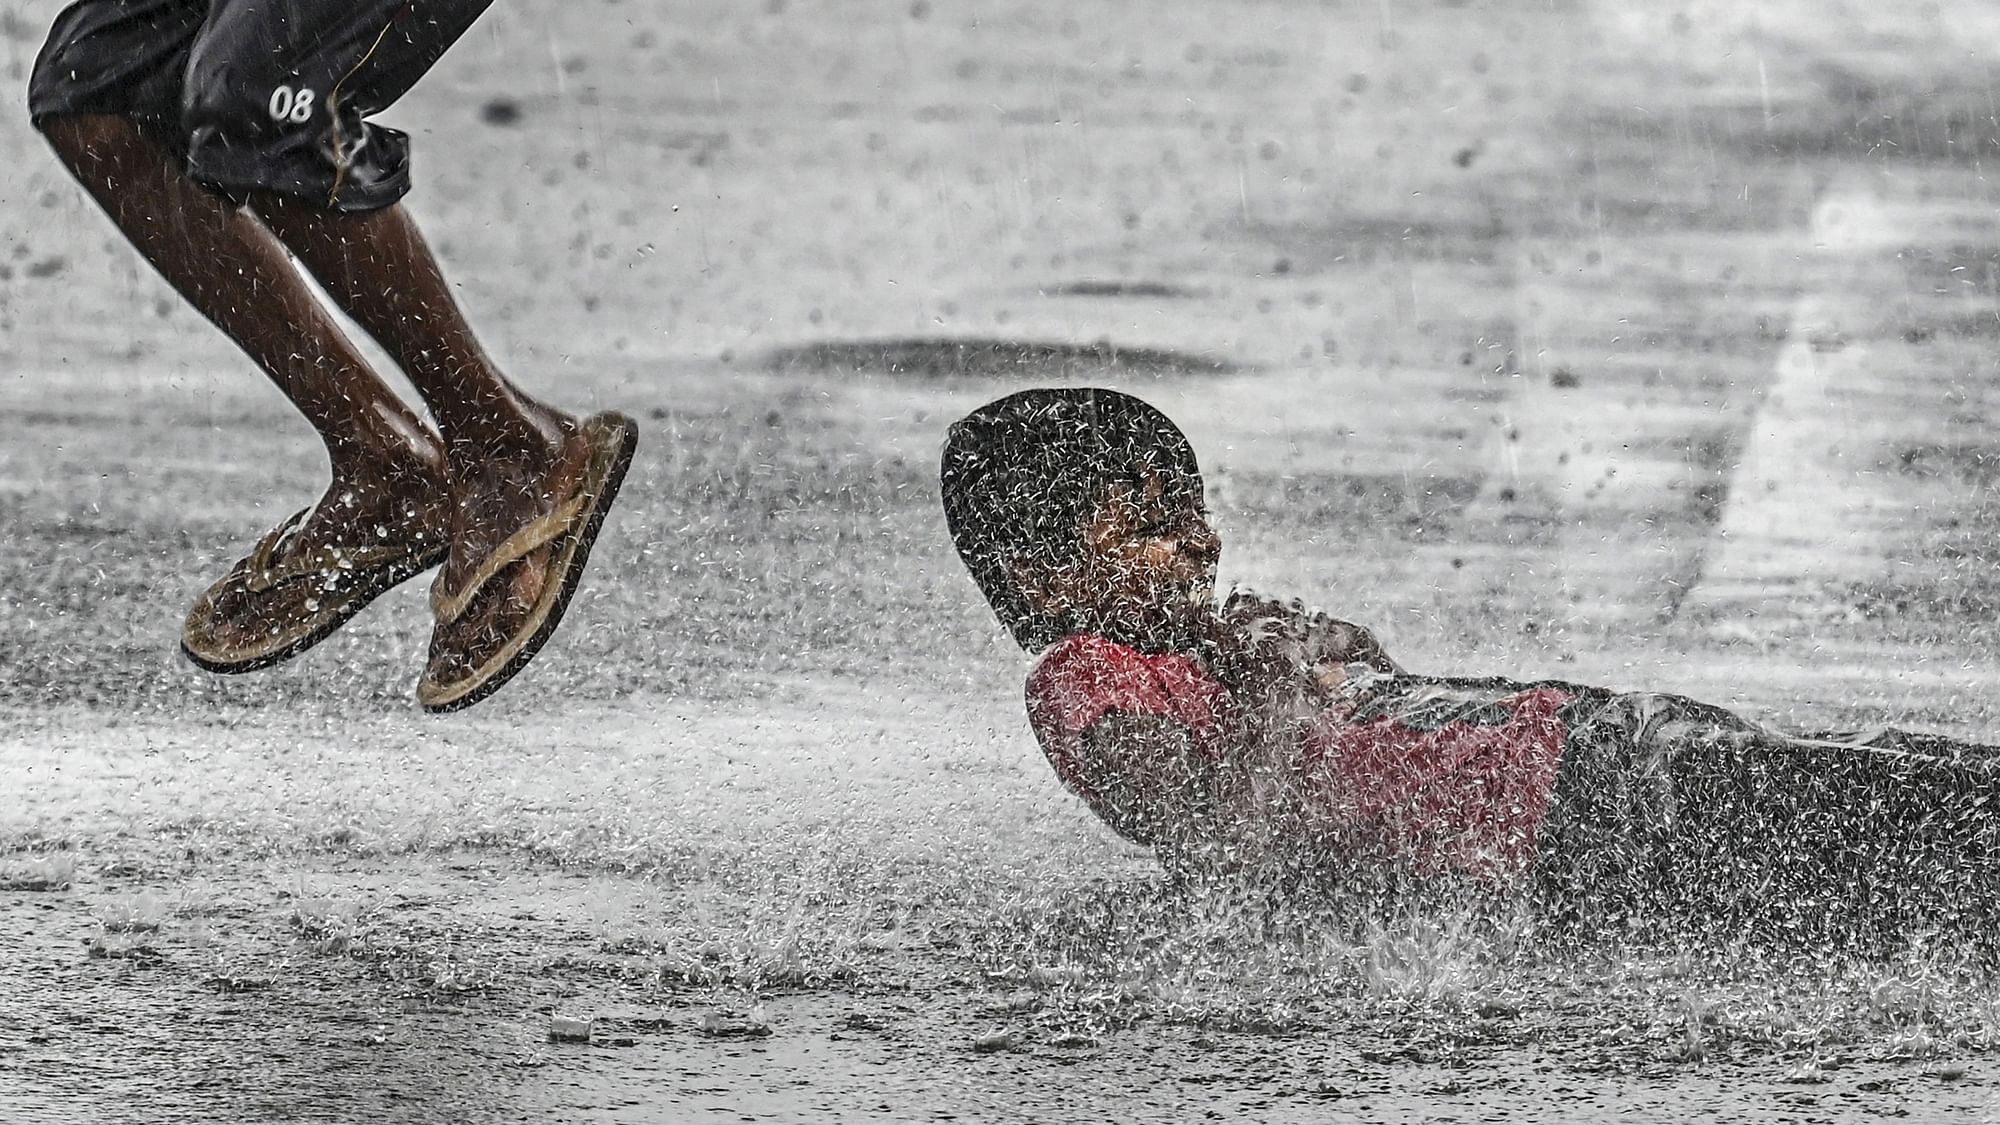 <div class="paragraphs"><p>New Delhi: Boys play on a waterlogged road amid monsoon rains, in New Delhi, on Thursday, 30 June. Delhi is witnessing heavy rain with the onset of monsoon, bringing much-needed relief after days of hot and humid weather.</p></div>